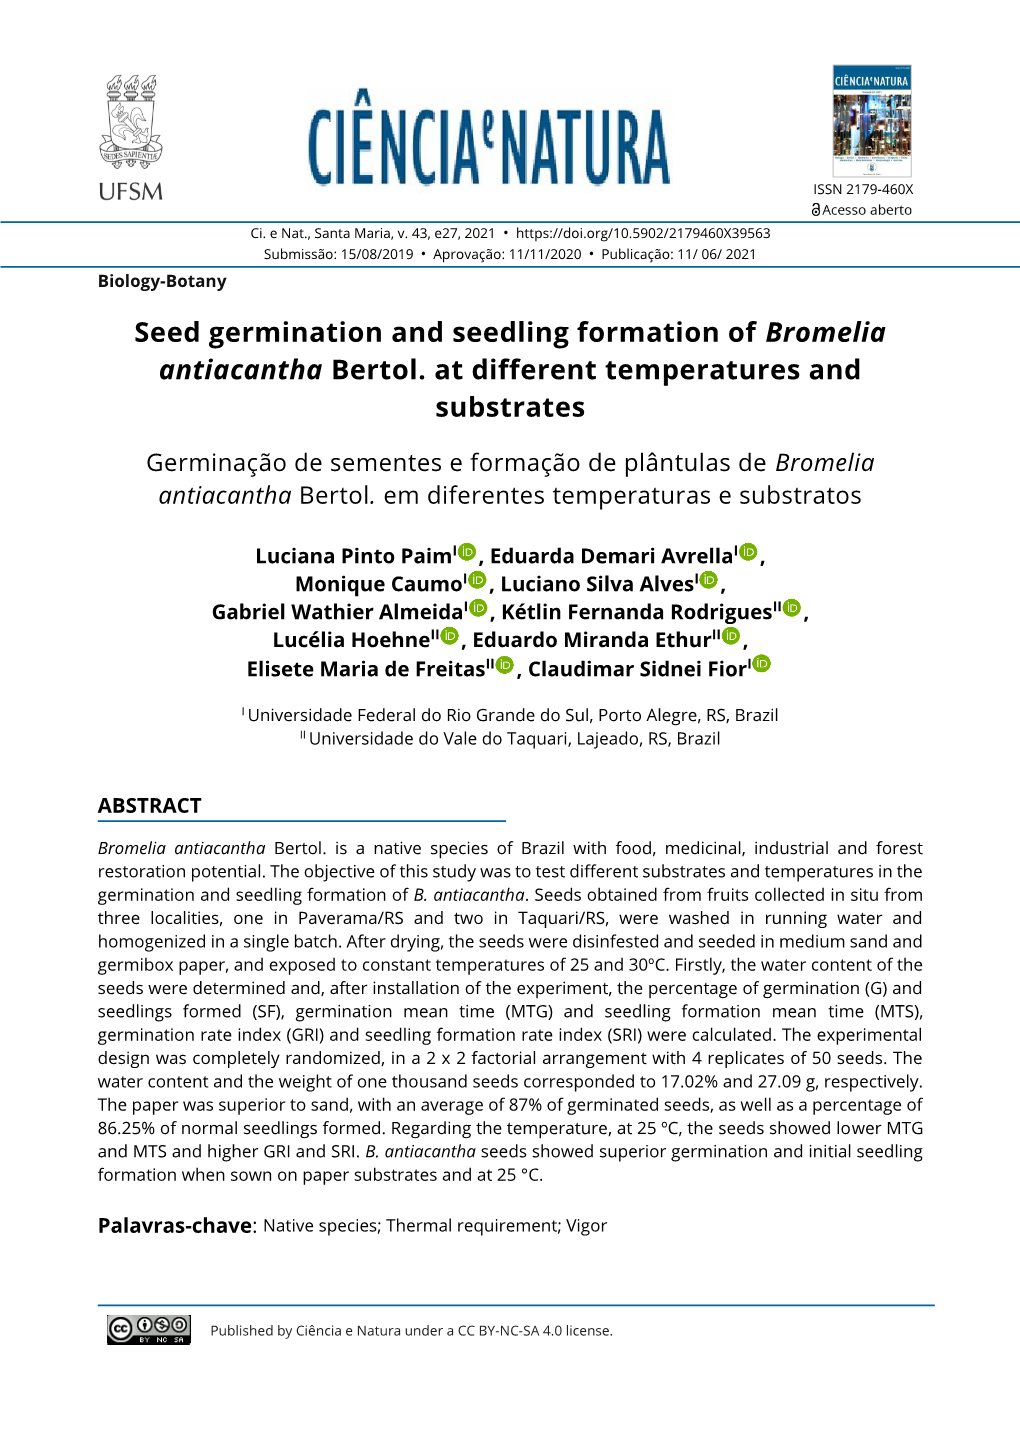 Seed Germination and Seedling Formation of Bromelia Antiacantha Bertol